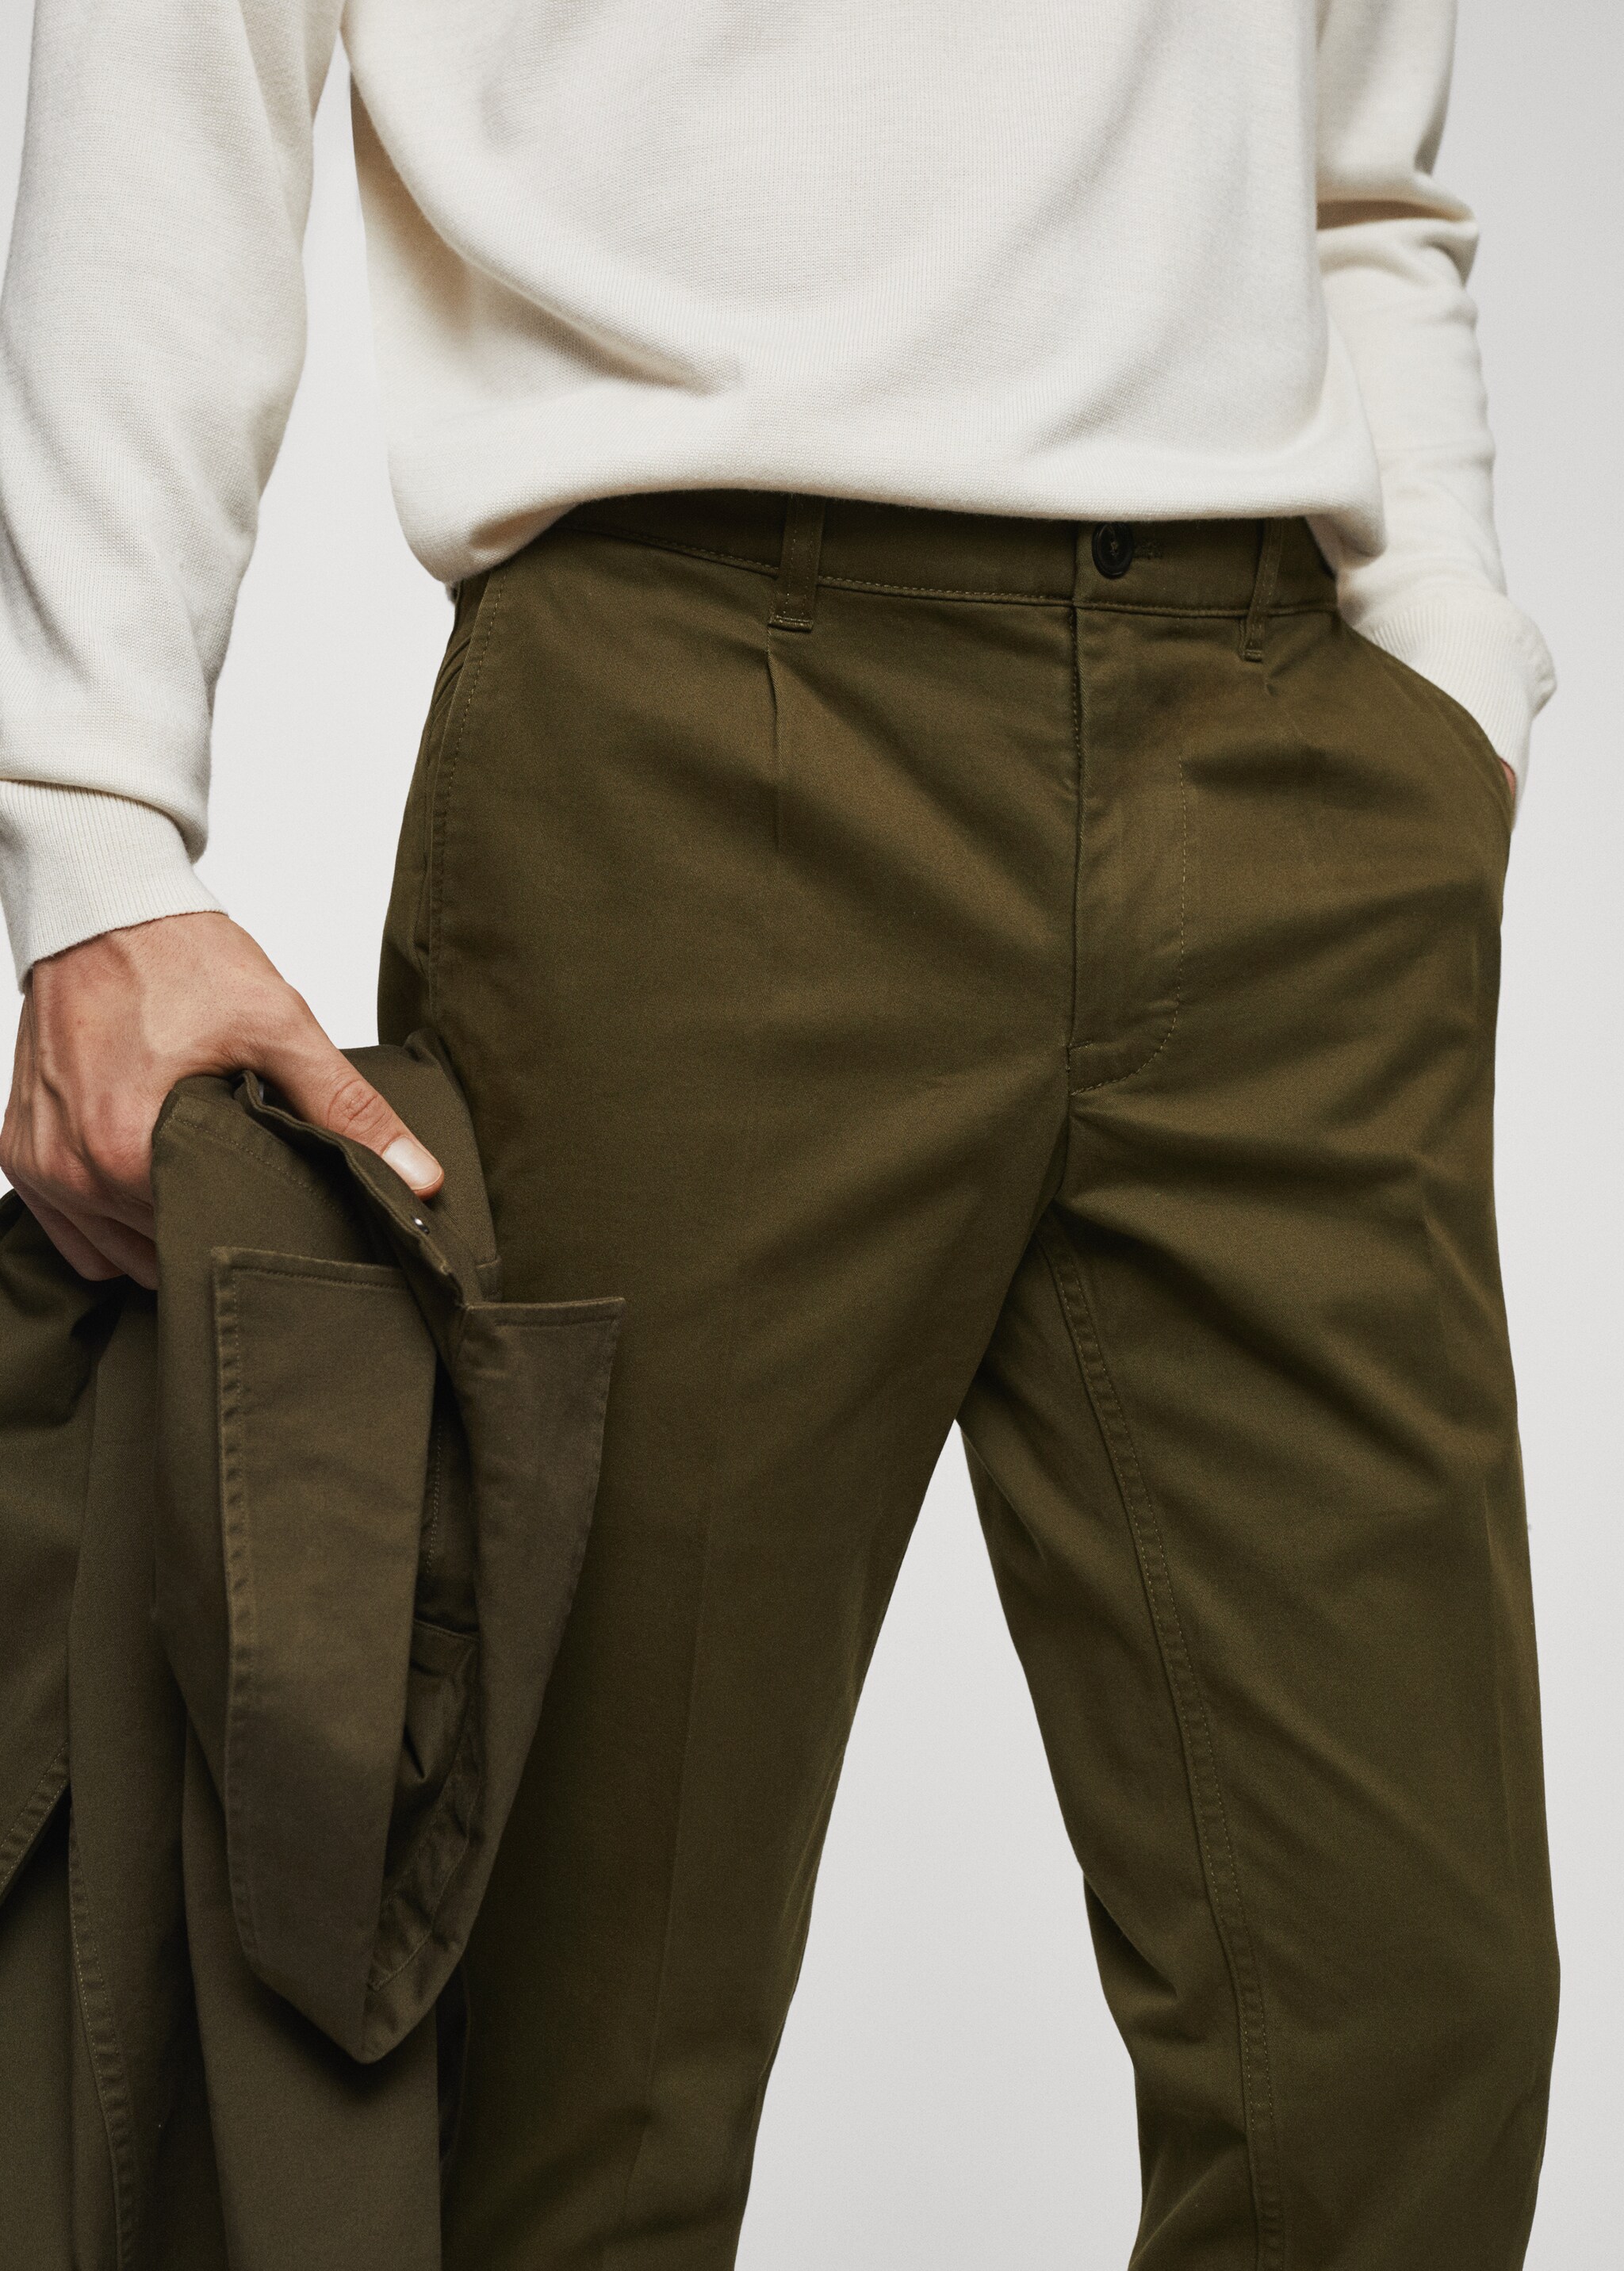 Pleated slim fit chinos - Details of the article 1